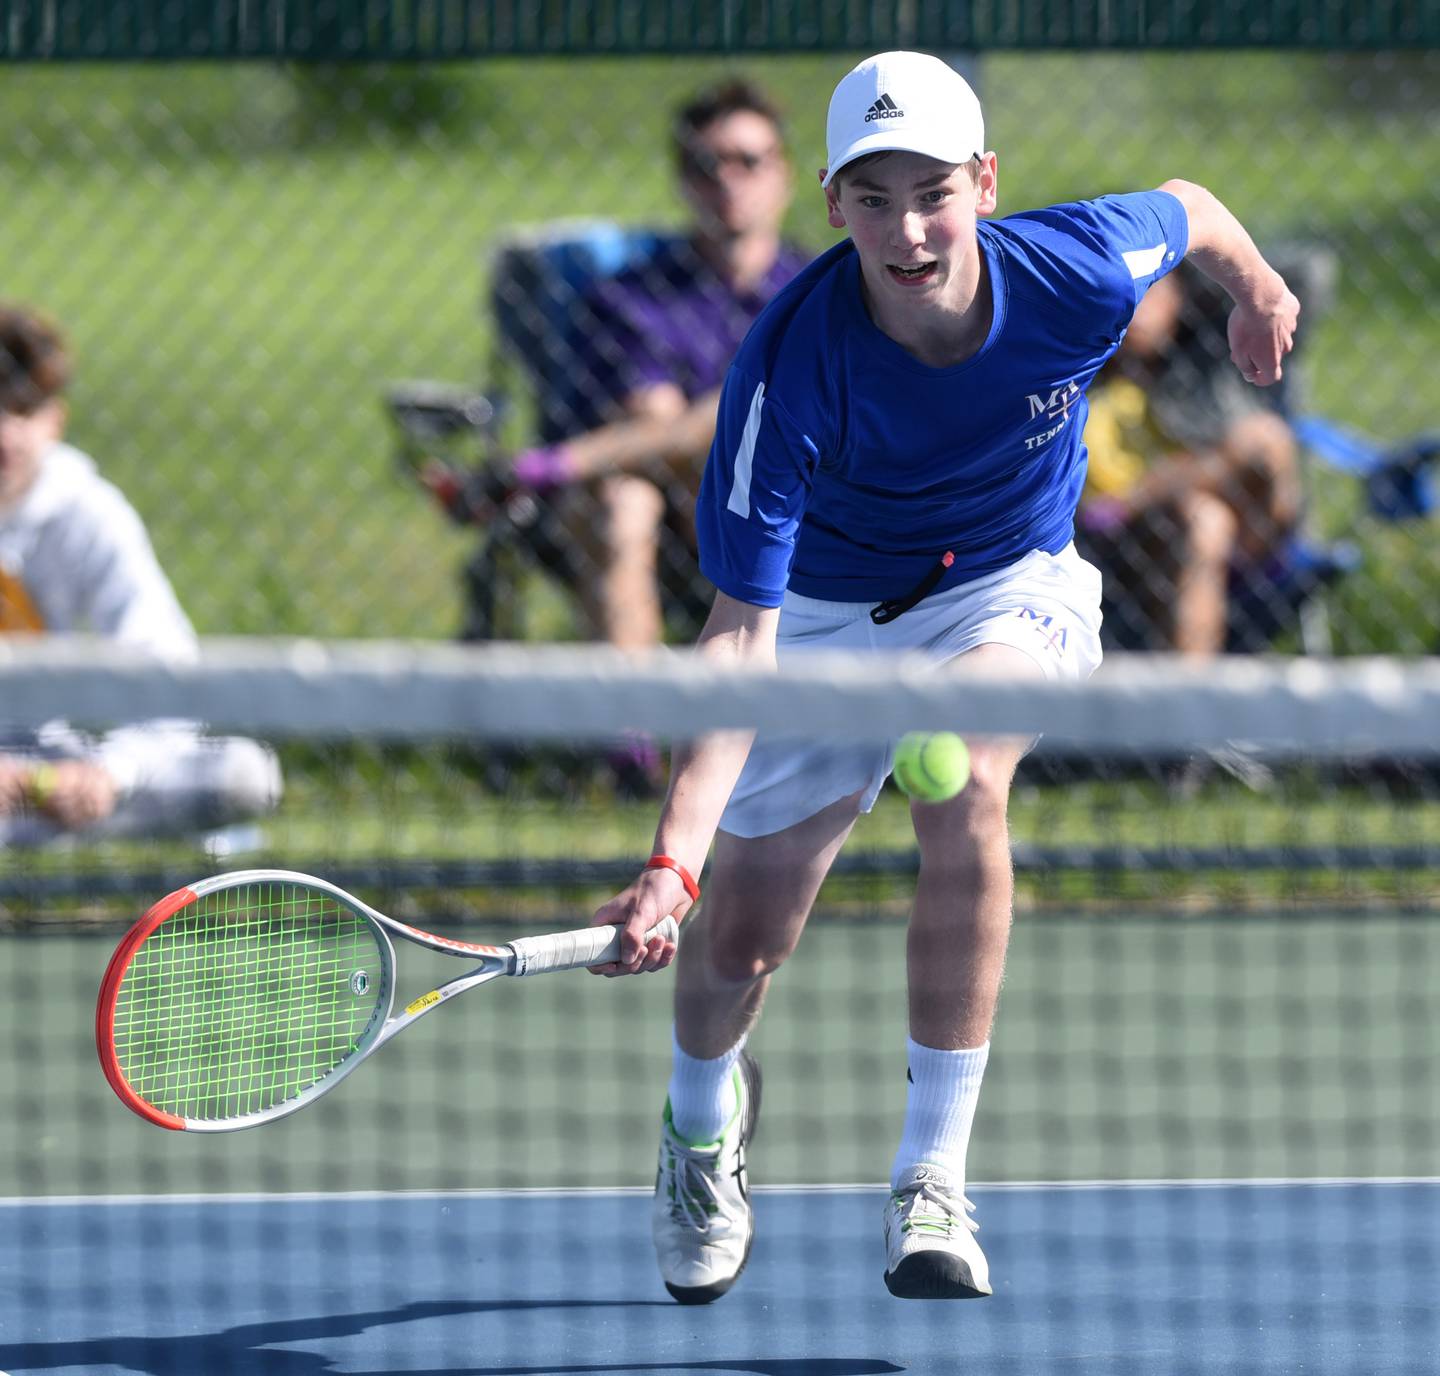 Joe Lewnard/jlewnard@dailyherald.com
Marmion singles player Benedict Graft hurries to play the ball at the net during the boys Class 1A state tennis semifinals at Hersey High School in Arlington Heights Saturday.